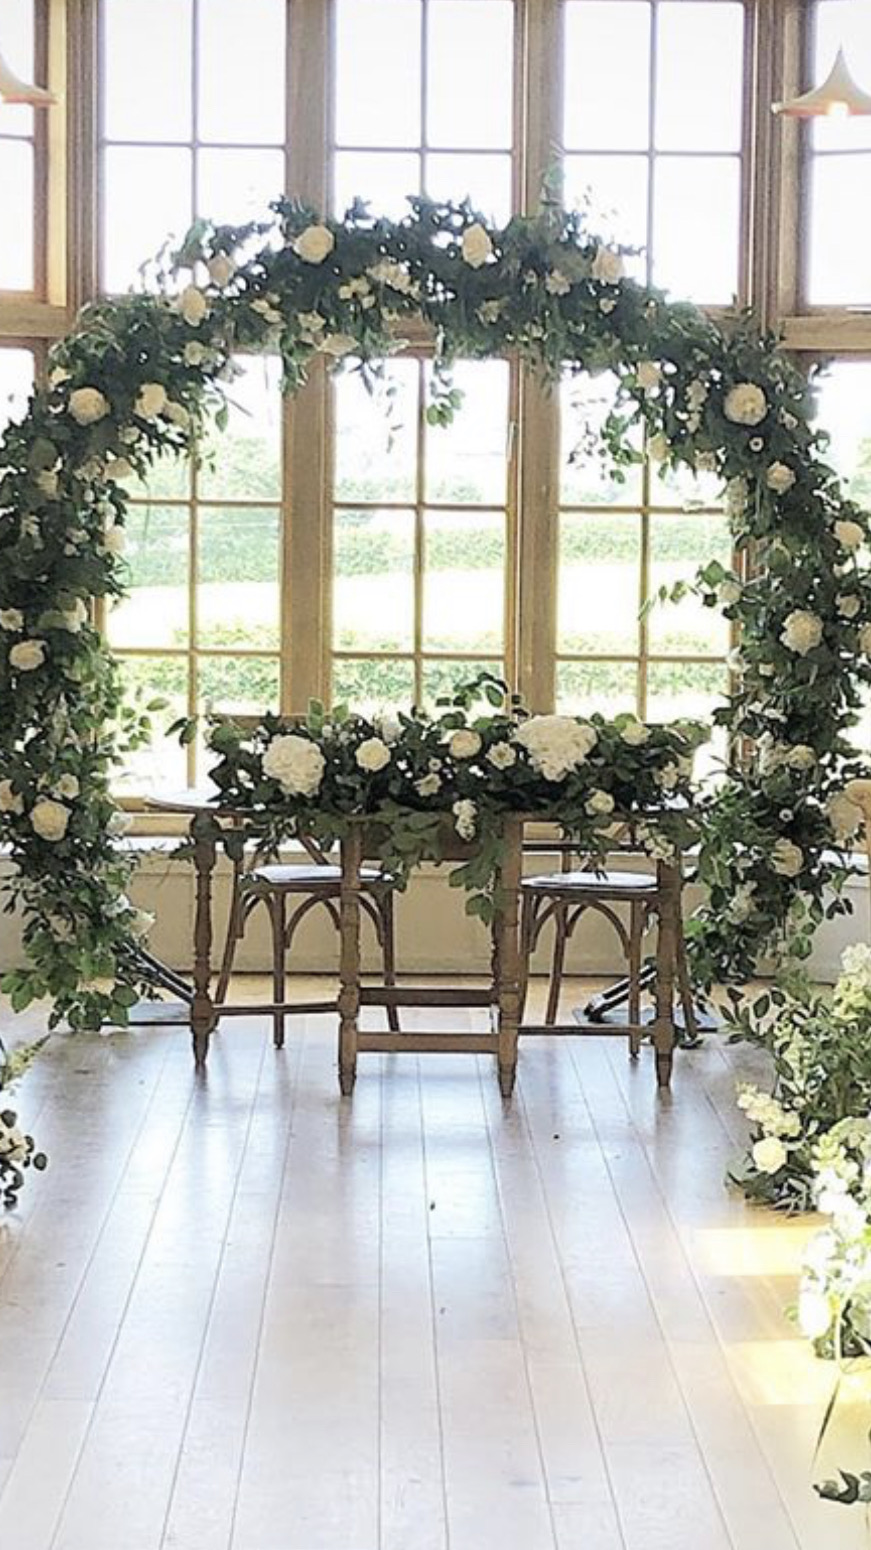 Your perfect wedding Day - you need a great florist